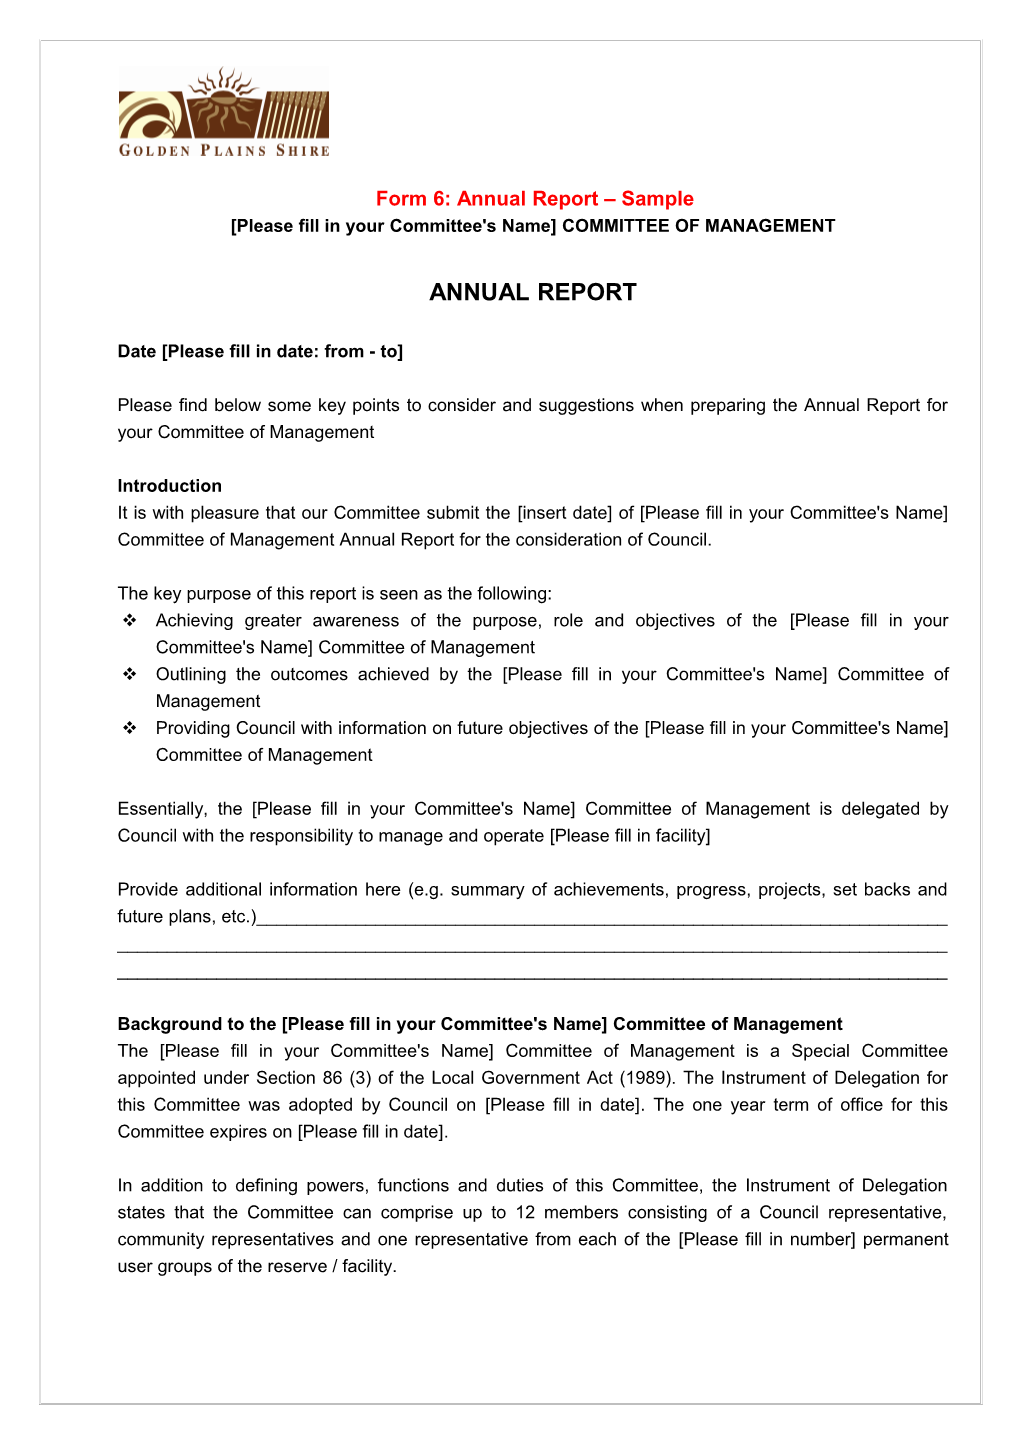 Form 6: Annual Report Sample